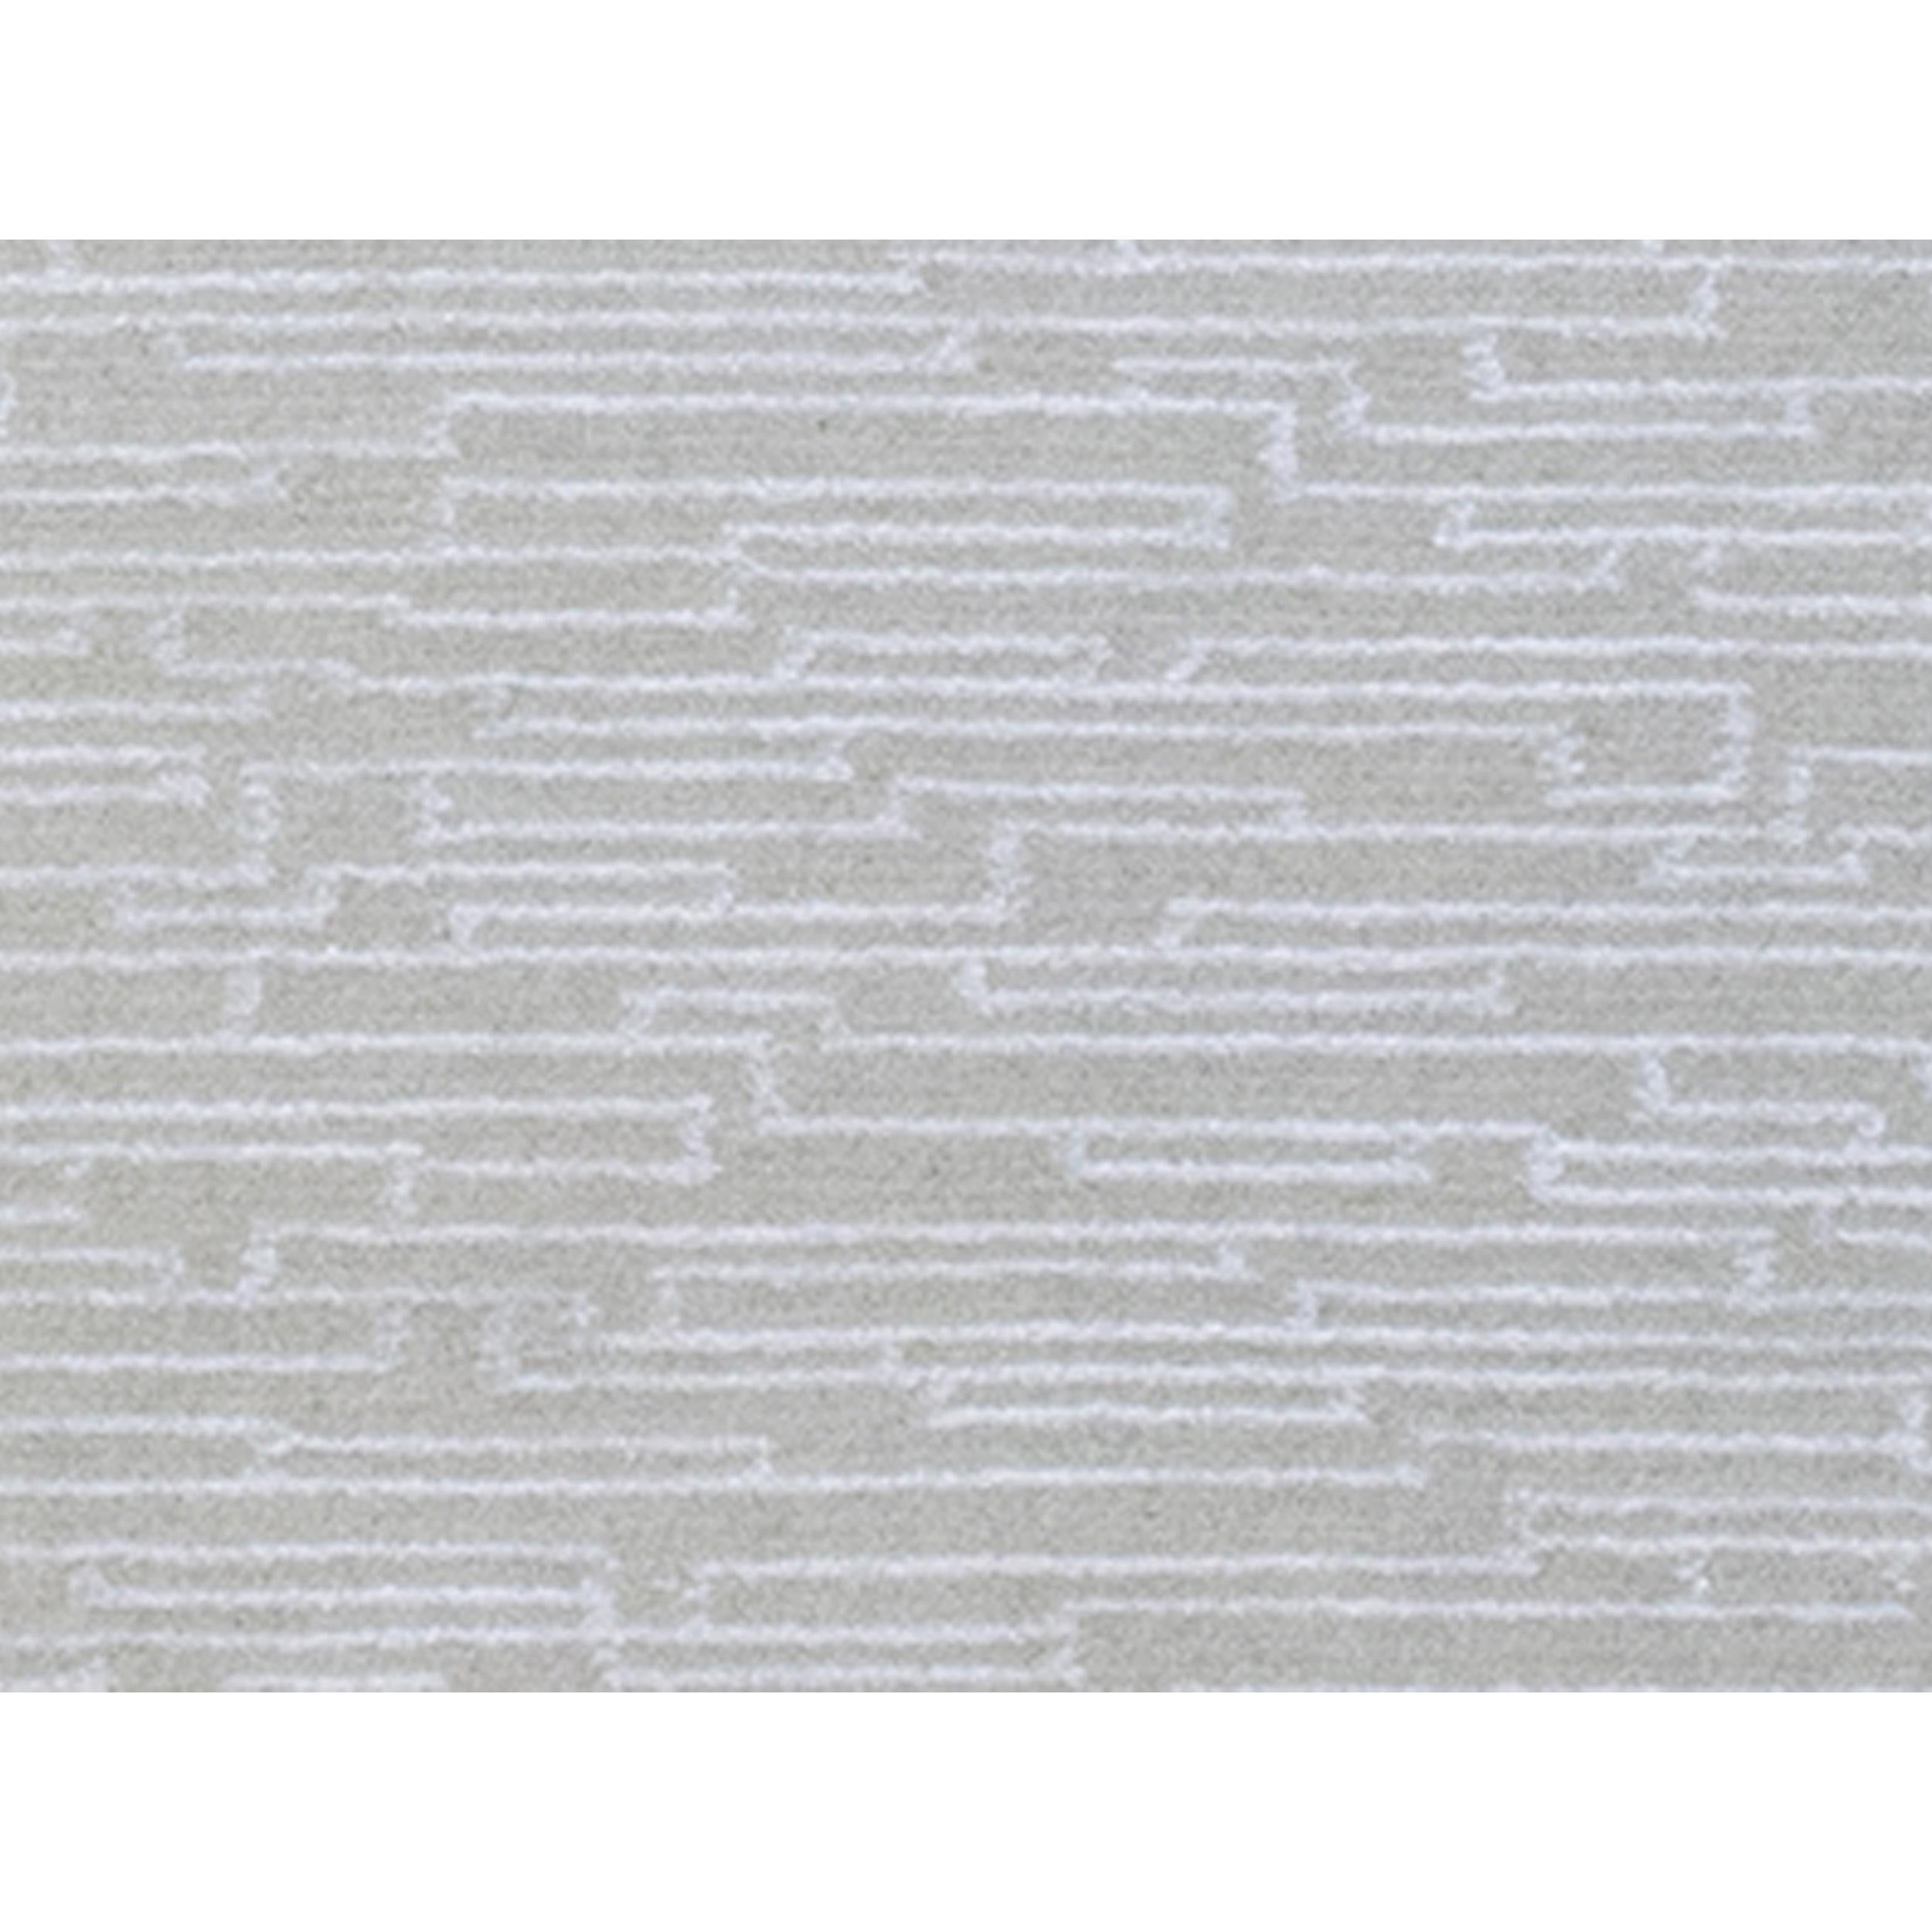 A subtle sense of texture is created in this sophisticated hand-woven rug. Contemporary pattern and updated neutral tones that work perfectly in any setting. Both touch and sight are delighted in this rug. A unique blend of wool and lustrous viscose